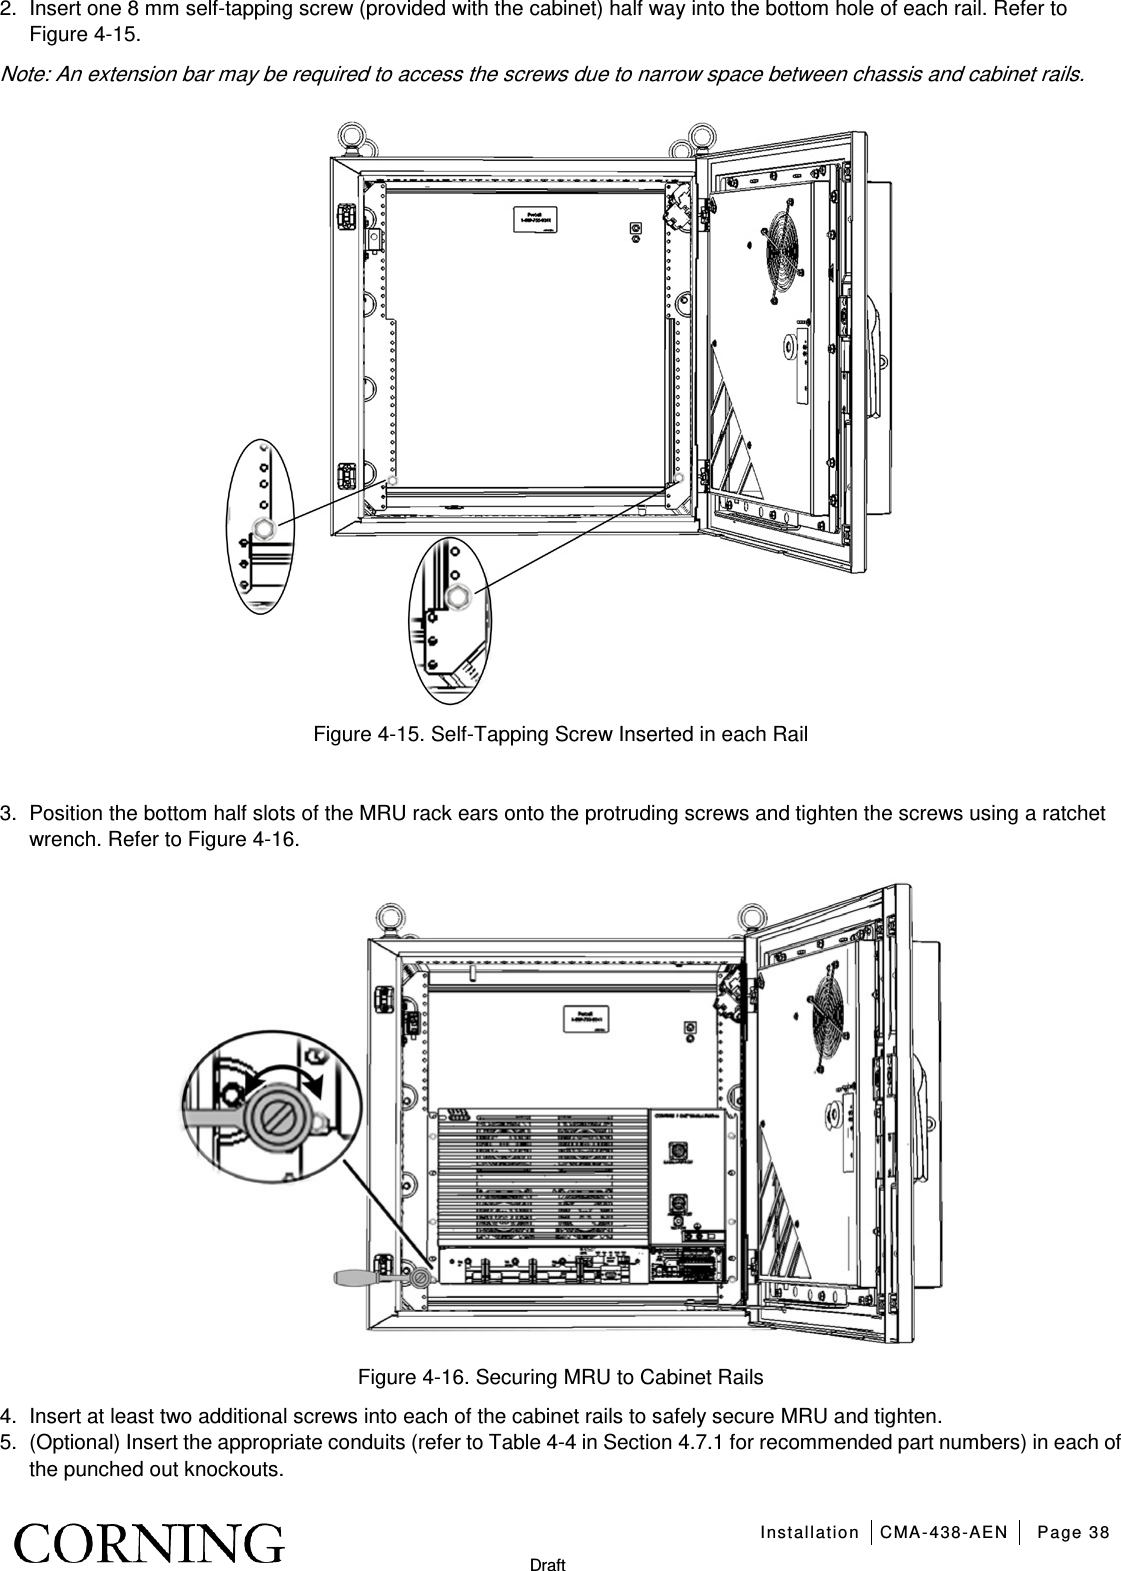   Installation CMA-438-AEN Page 38   Draft 2.  Insert one 8 mm self-tapping screw (provided with the cabinet) half way into the bottom hole of each rail. Refer to Figure  4-15. Note: An extension bar may be required to access the screws due to narrow space between chassis and cabinet rails.  Figure  4-15. Self-Tapping Screw Inserted in each Rail  3.  Position the bottom half slots of the MRU rack ears onto the protruding screws and tighten the screws using a ratchet wrench. Refer to Figure  4-16.  Figure  4-16. Securing MRU to Cabinet Rails 4.  Insert at least two additional screws into each of the cabinet rails to safely secure MRU and tighten. 5.  (Optional) Insert the appropriate conduits (refer to Table  4-4 in Section  4.7.1 for recommended part numbers) in each of the punched out knockouts.    